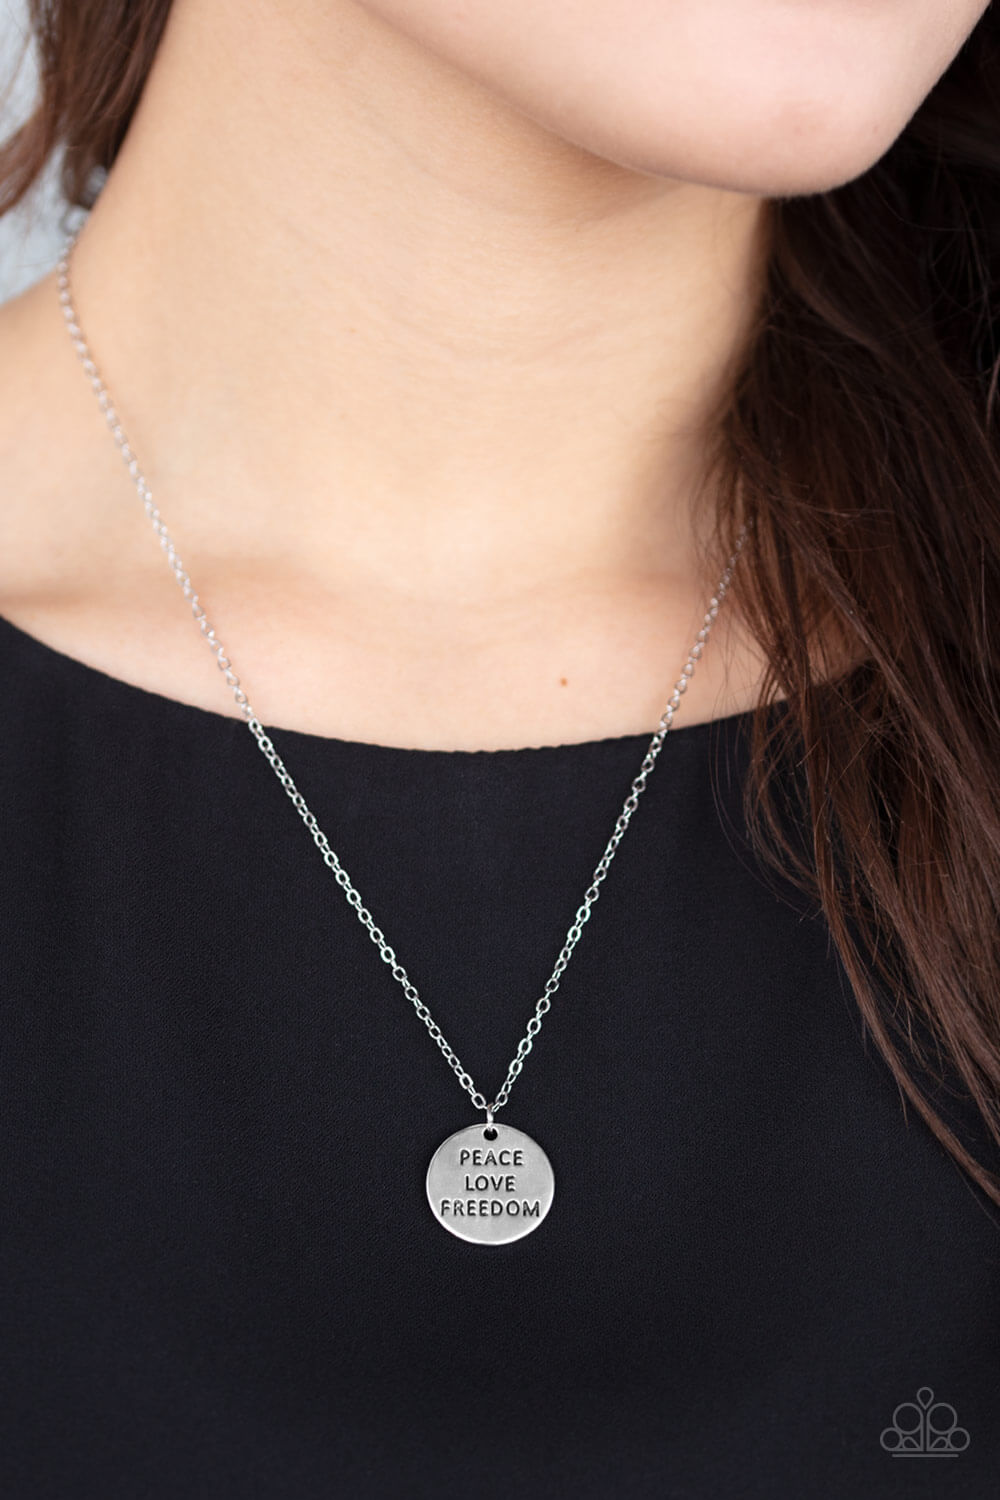 Freedom Isnt Free - Silver Necklace Set - Princess Glam Shop